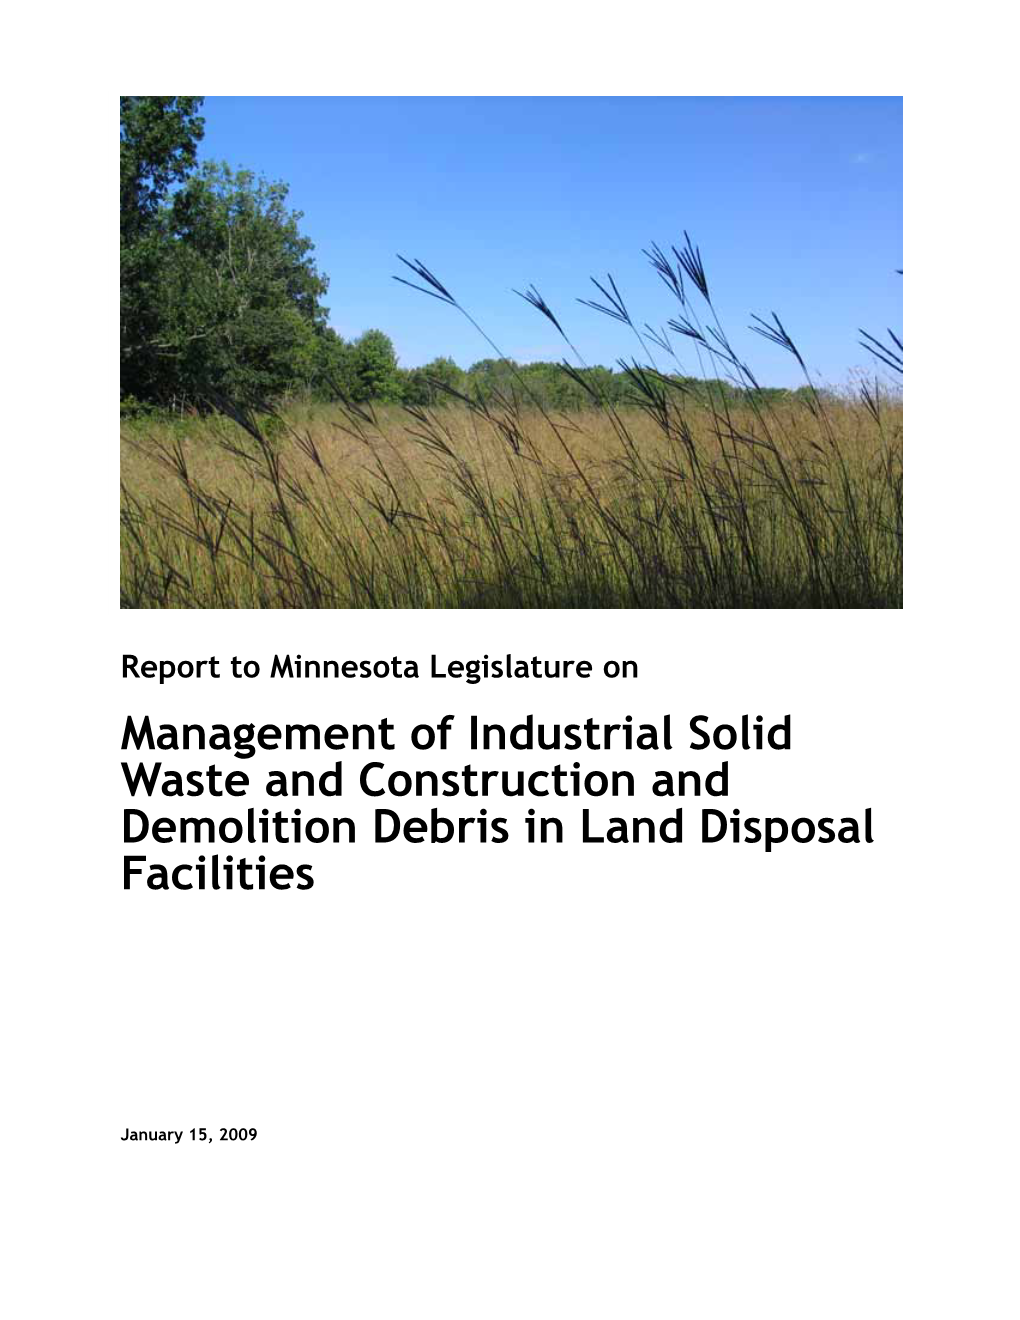 Management of Industrial Solid Waste and Construction and Demolition Debris in Land Disposal Facilities